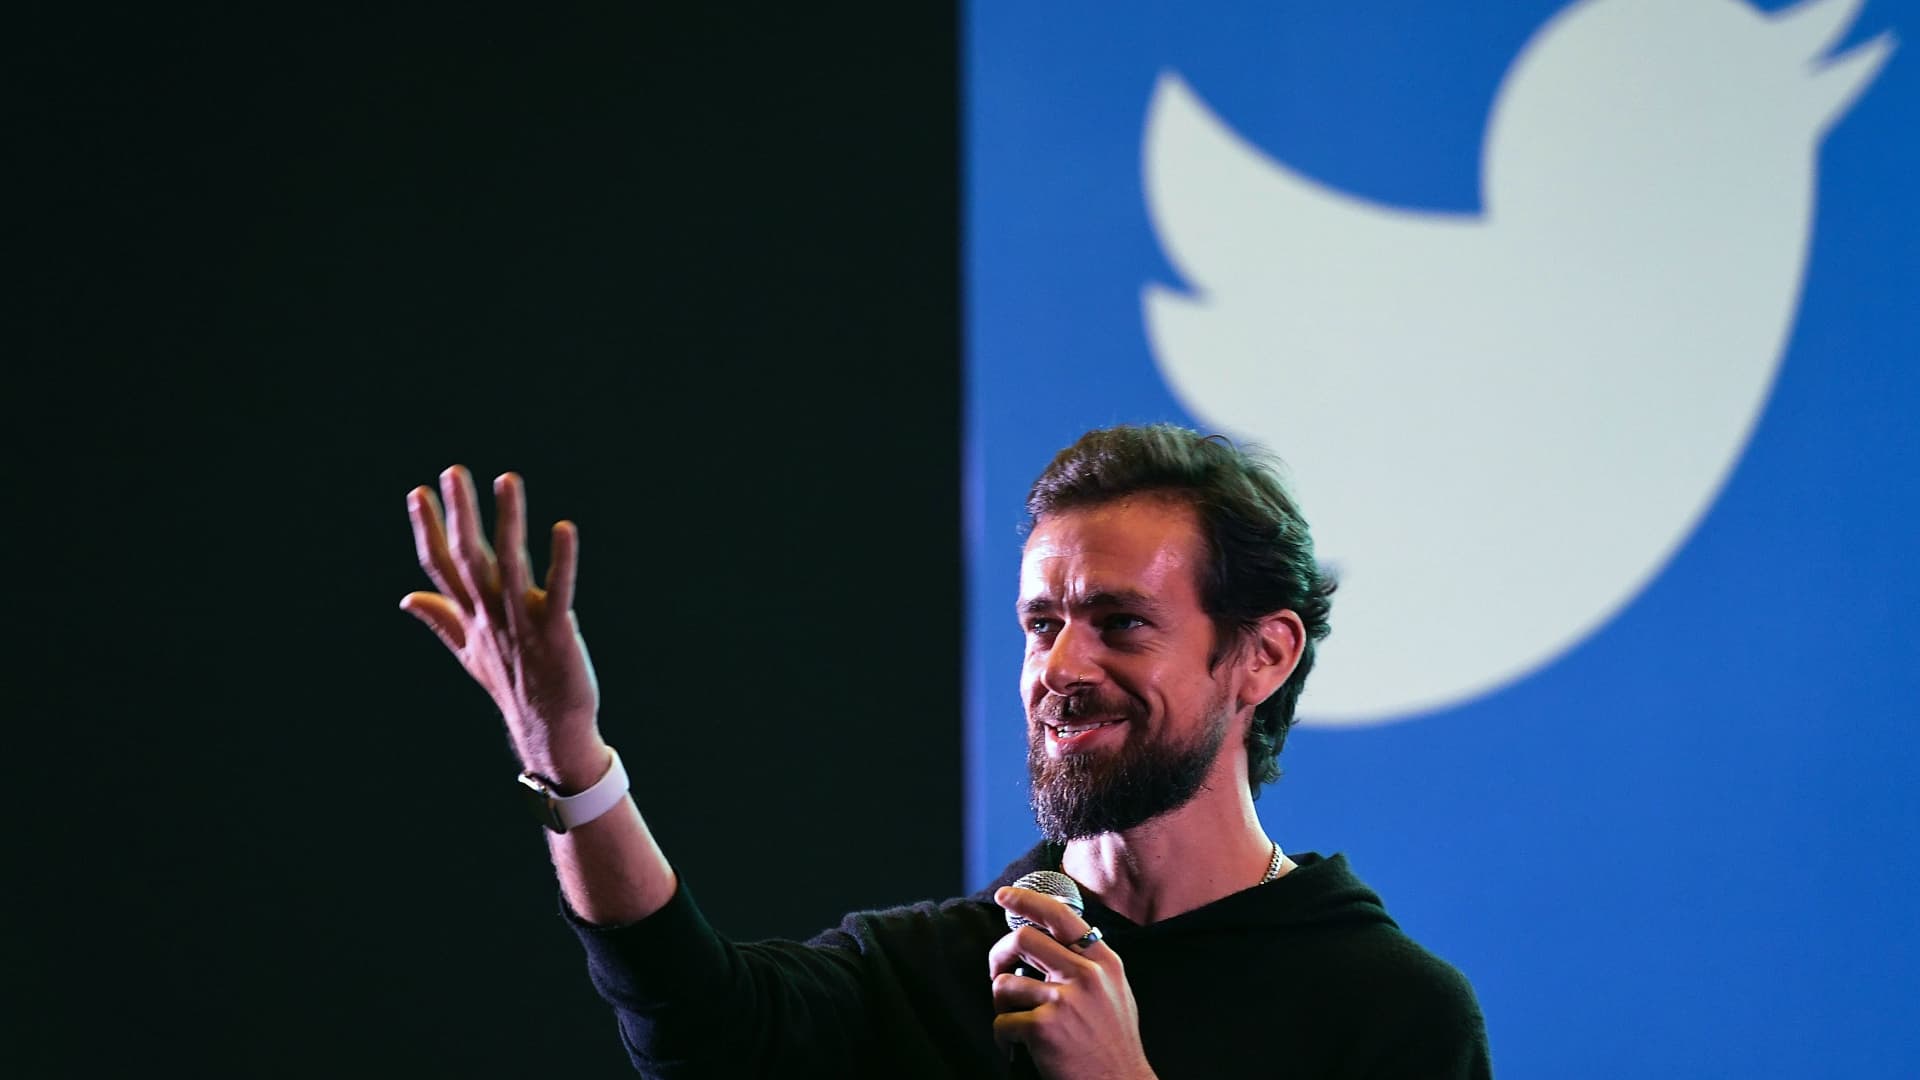 Twitter CEO and co-founder Jack Dorsey gestures while interacting with students at the Indian Institute of Technology (IIT) in New Delhi on November 12, 2018.